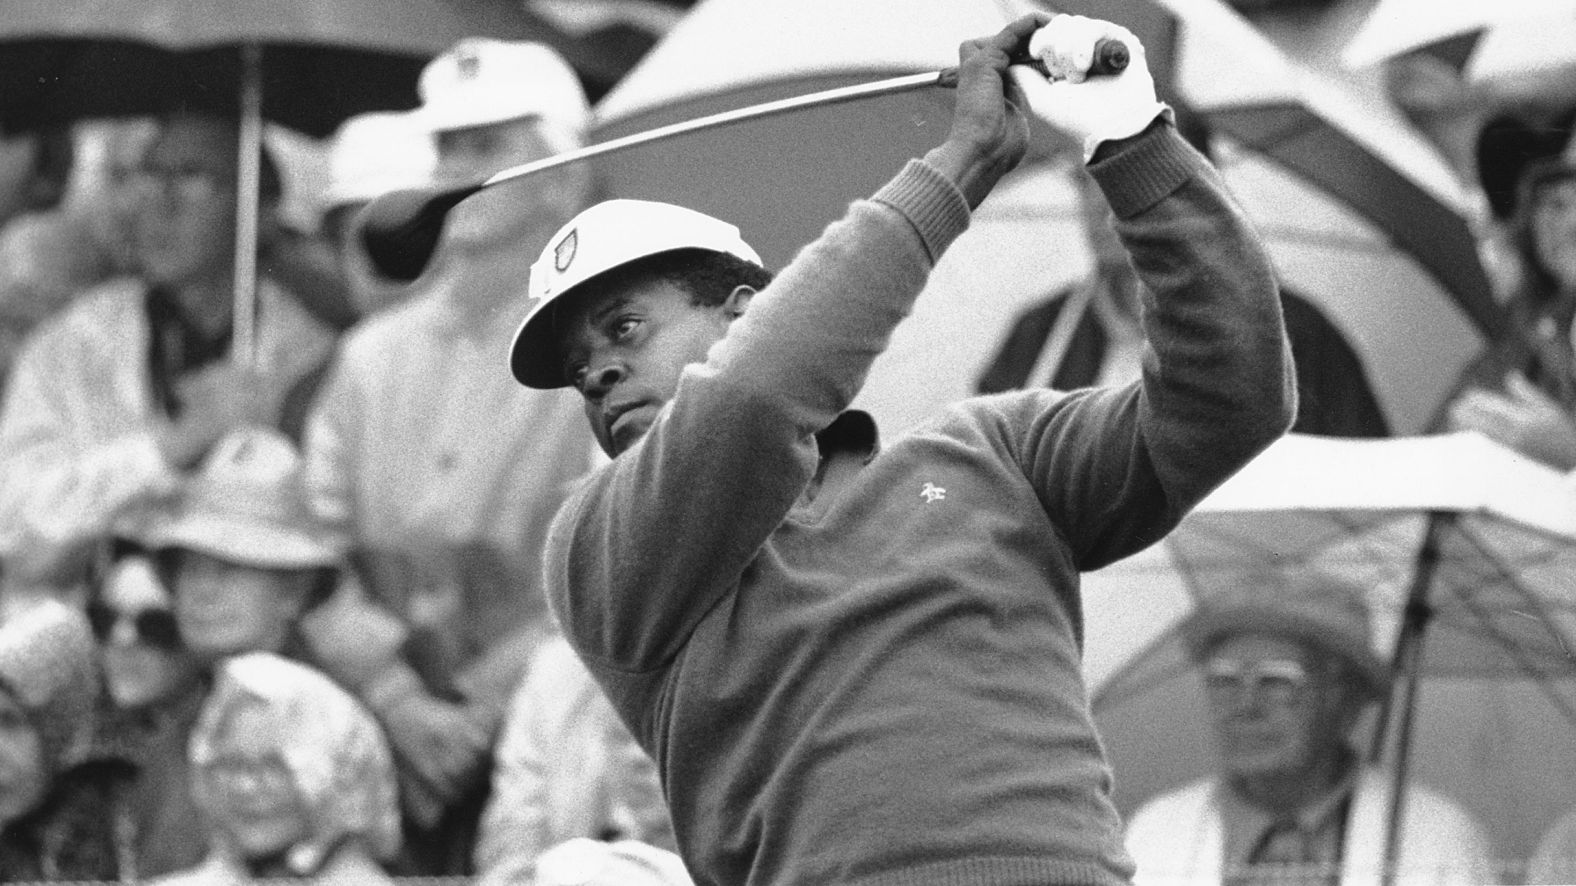 Lee Elder watches the flight of his ball as he tees off at the Masters in 1975. Elder <a href="index.php?page=&url=https%3A%2F%2Fwww.cnn.com%2F2015%2F04%2F08%2Fgolf%2Fgolf-masters-lee-elder%2Findex.html" target="_blank">told CNN in 2015</a> that making his Masters debut was a "very nerve-racking" experience. "I was shaking so badly, I did not know if I was even going to be able to tee up the ball," he said.